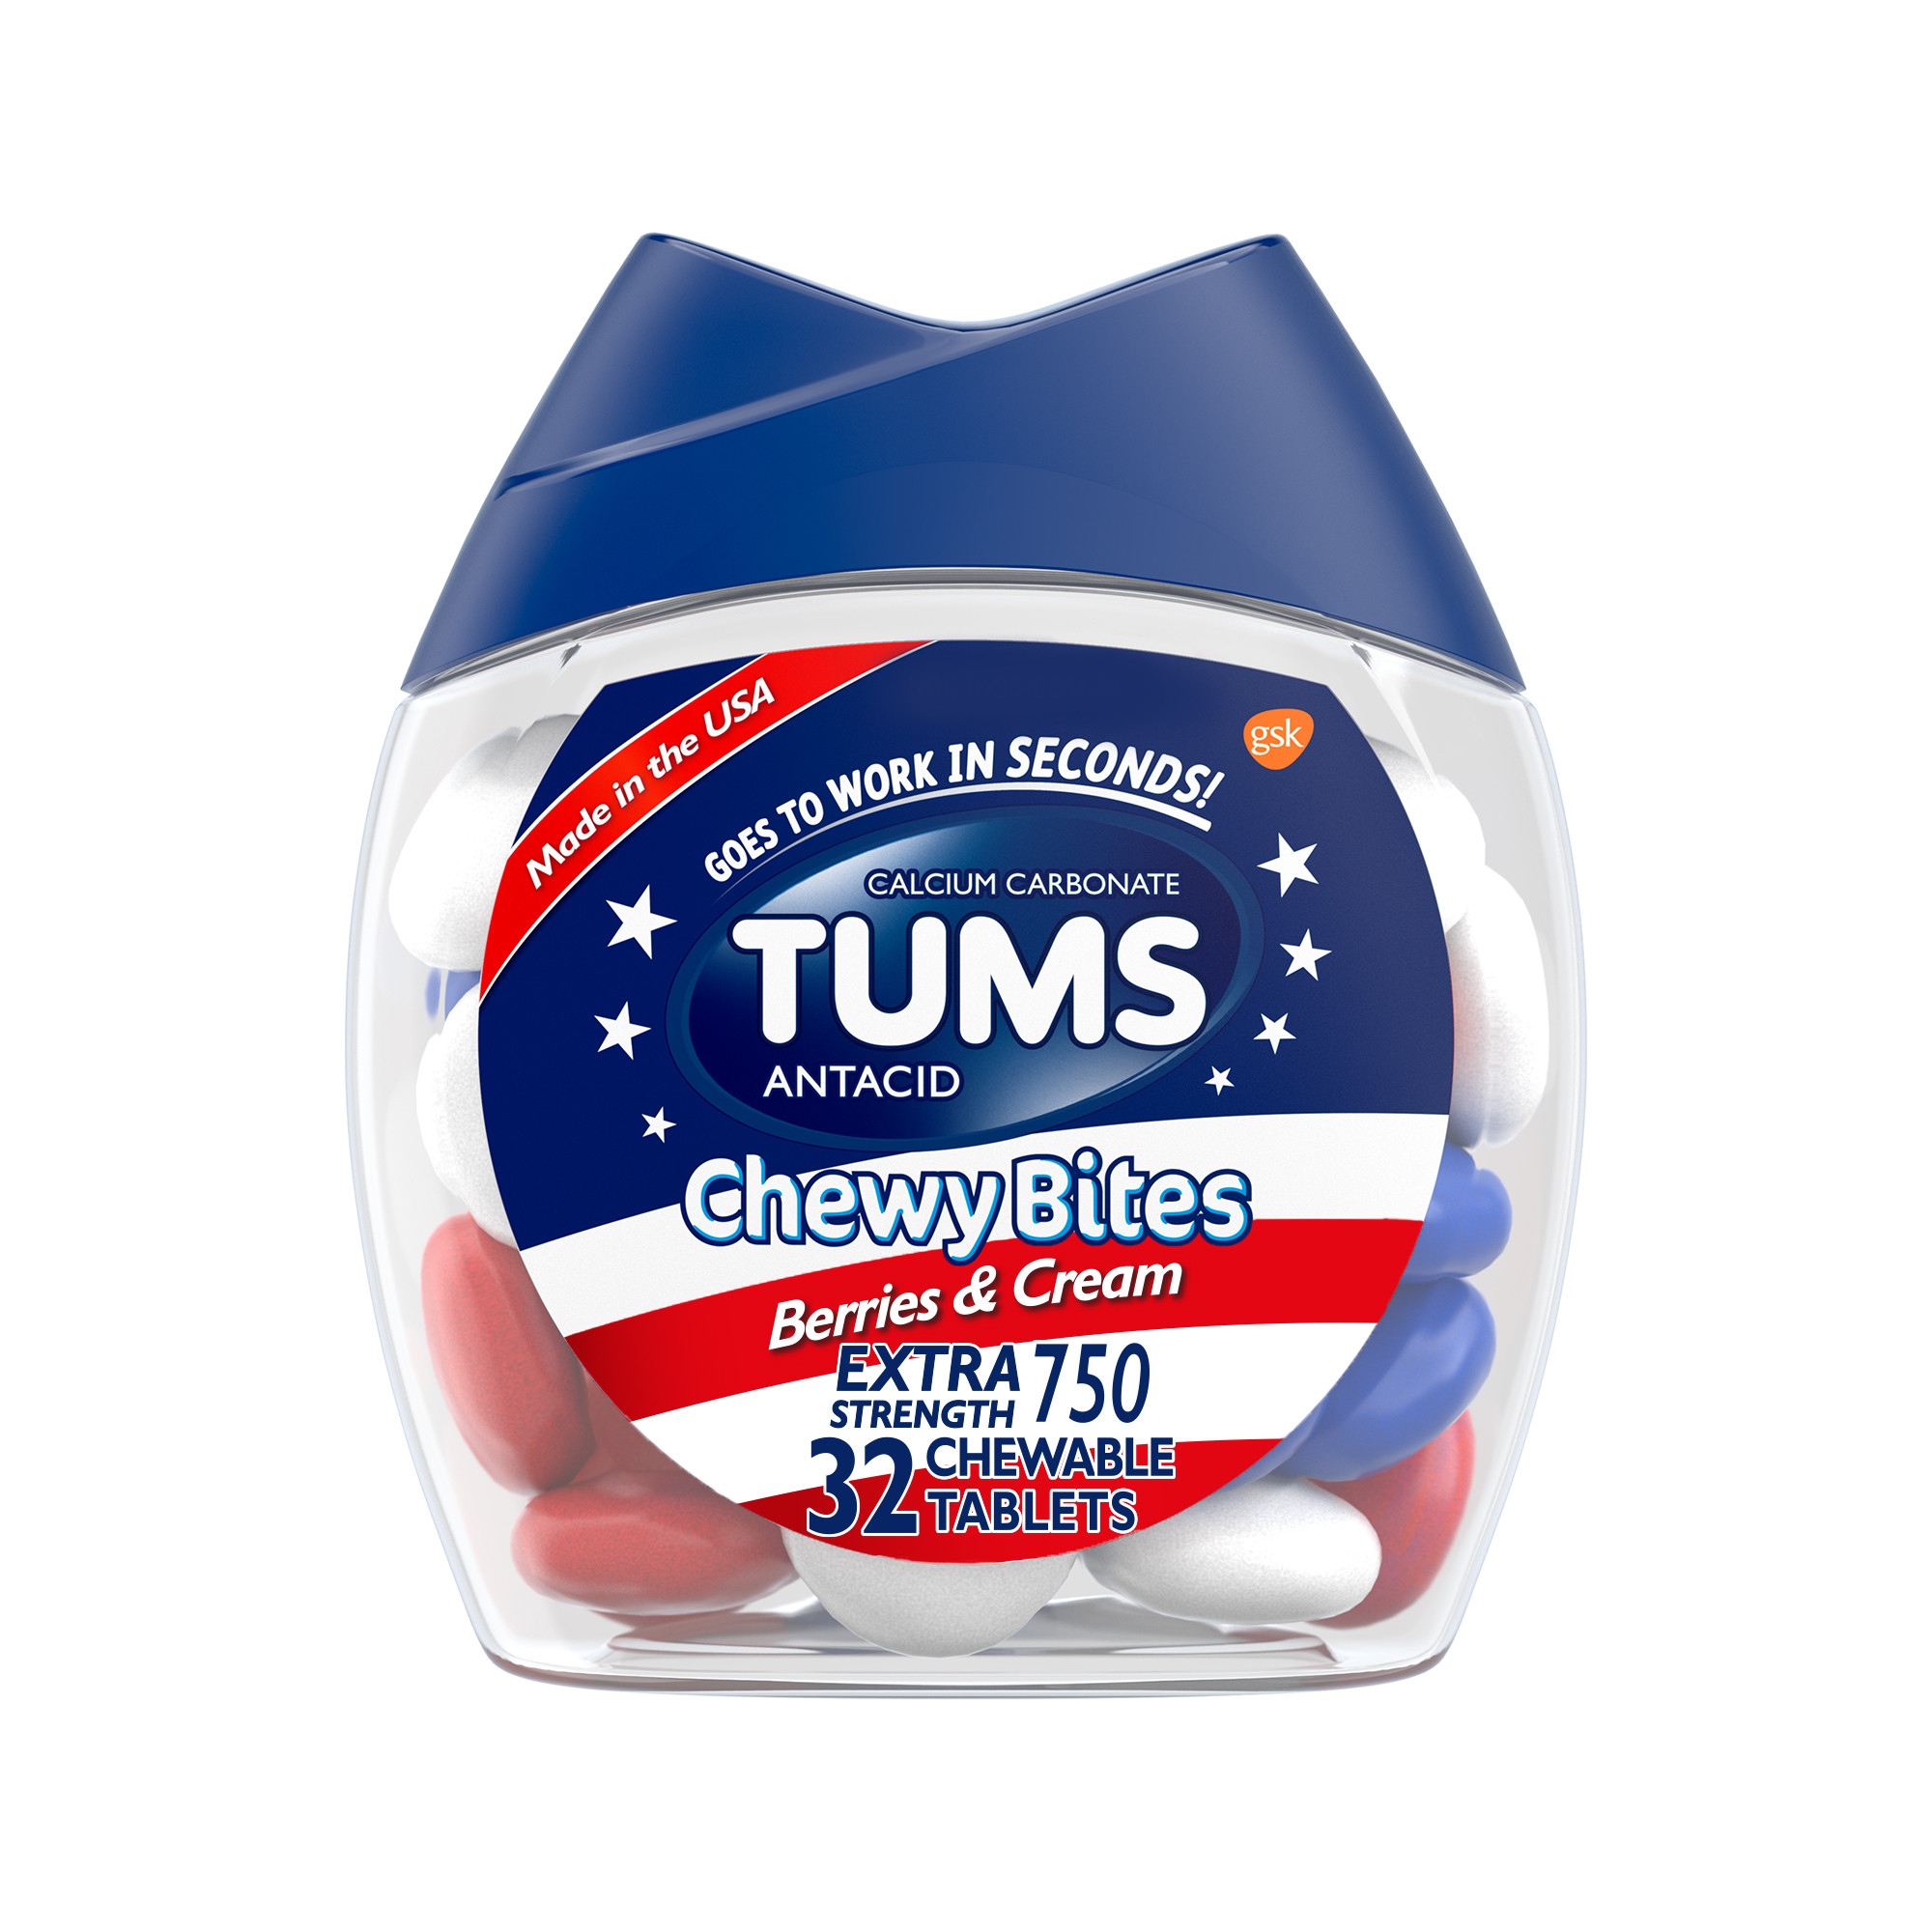 Tums Chewy Bites Heartburn Relief Antacid Chews, Berries and Cream, 32 Count - image 1 of 10